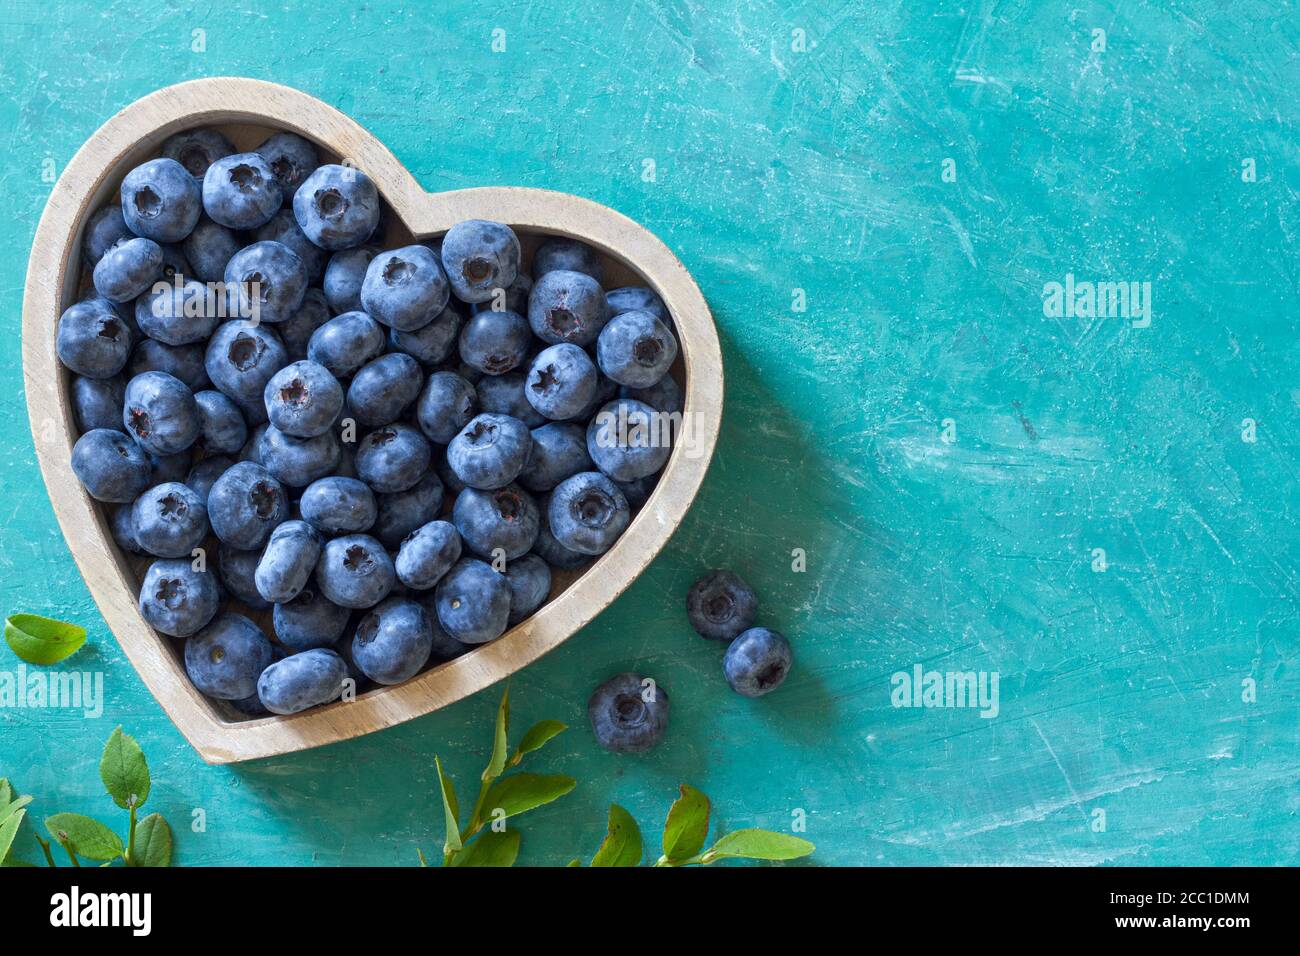 Fresh ripe blueberries in heart shaped bowl on blue background with copy space for your text Stock Photo